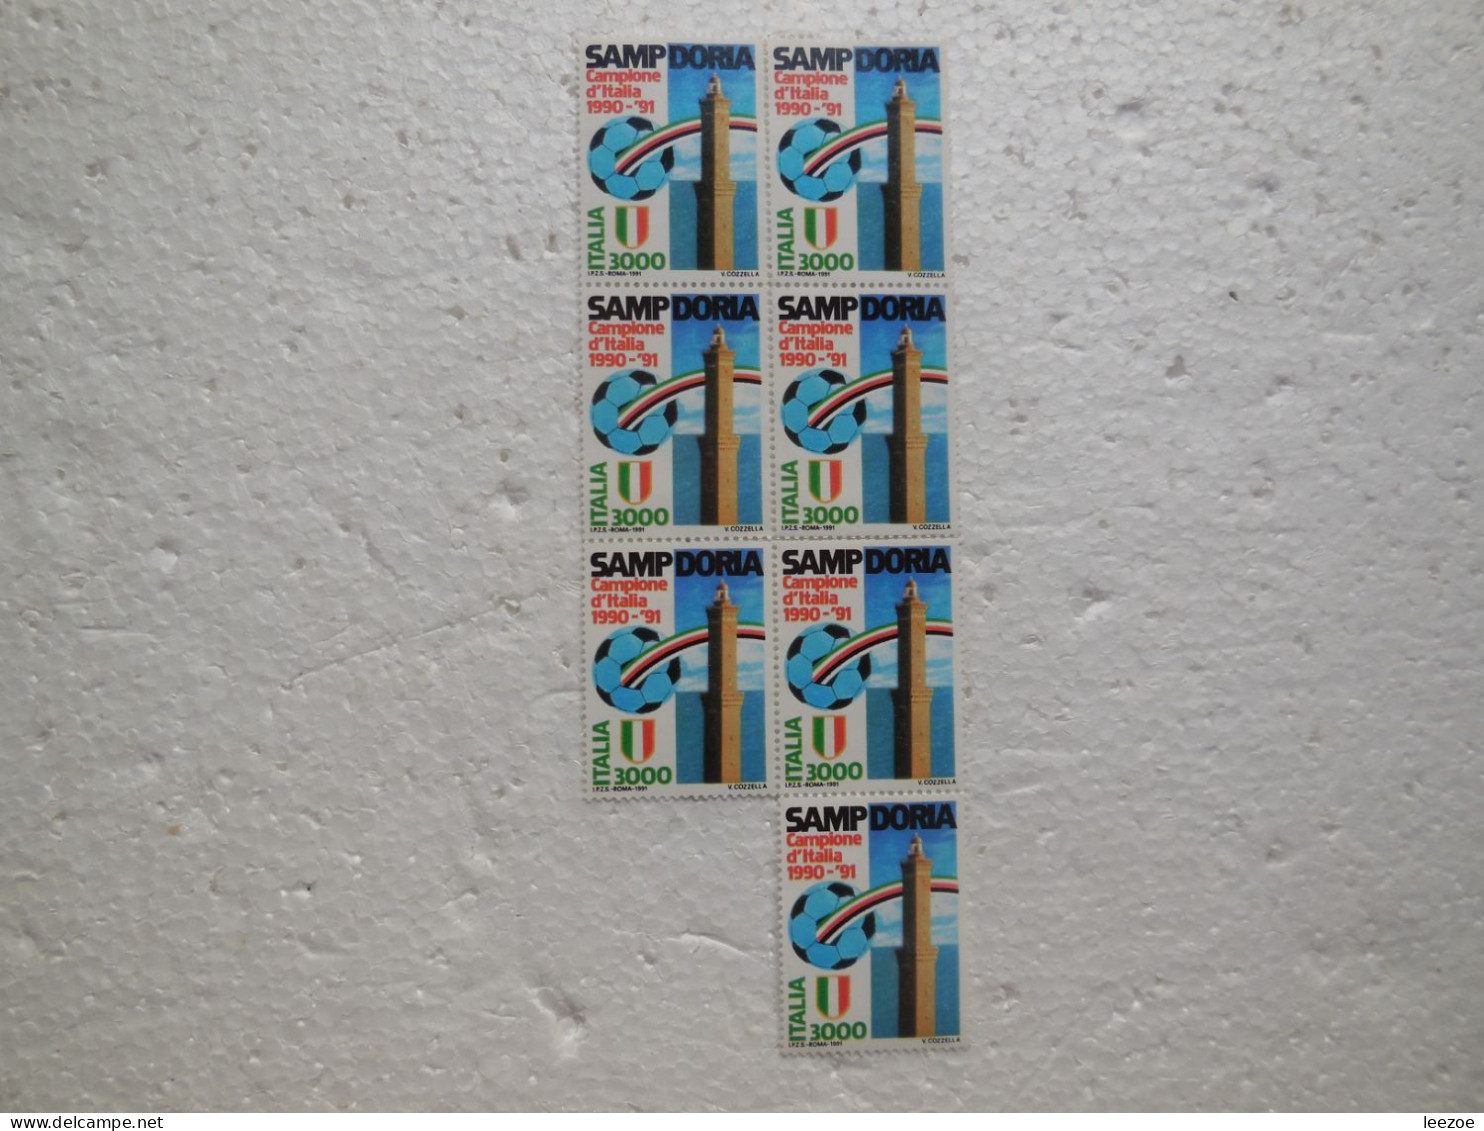 STAMP ITALIA, lot TIMBRES ITALIEN, timbres FOOT ITALIA 90.  ...ref N5/40/8